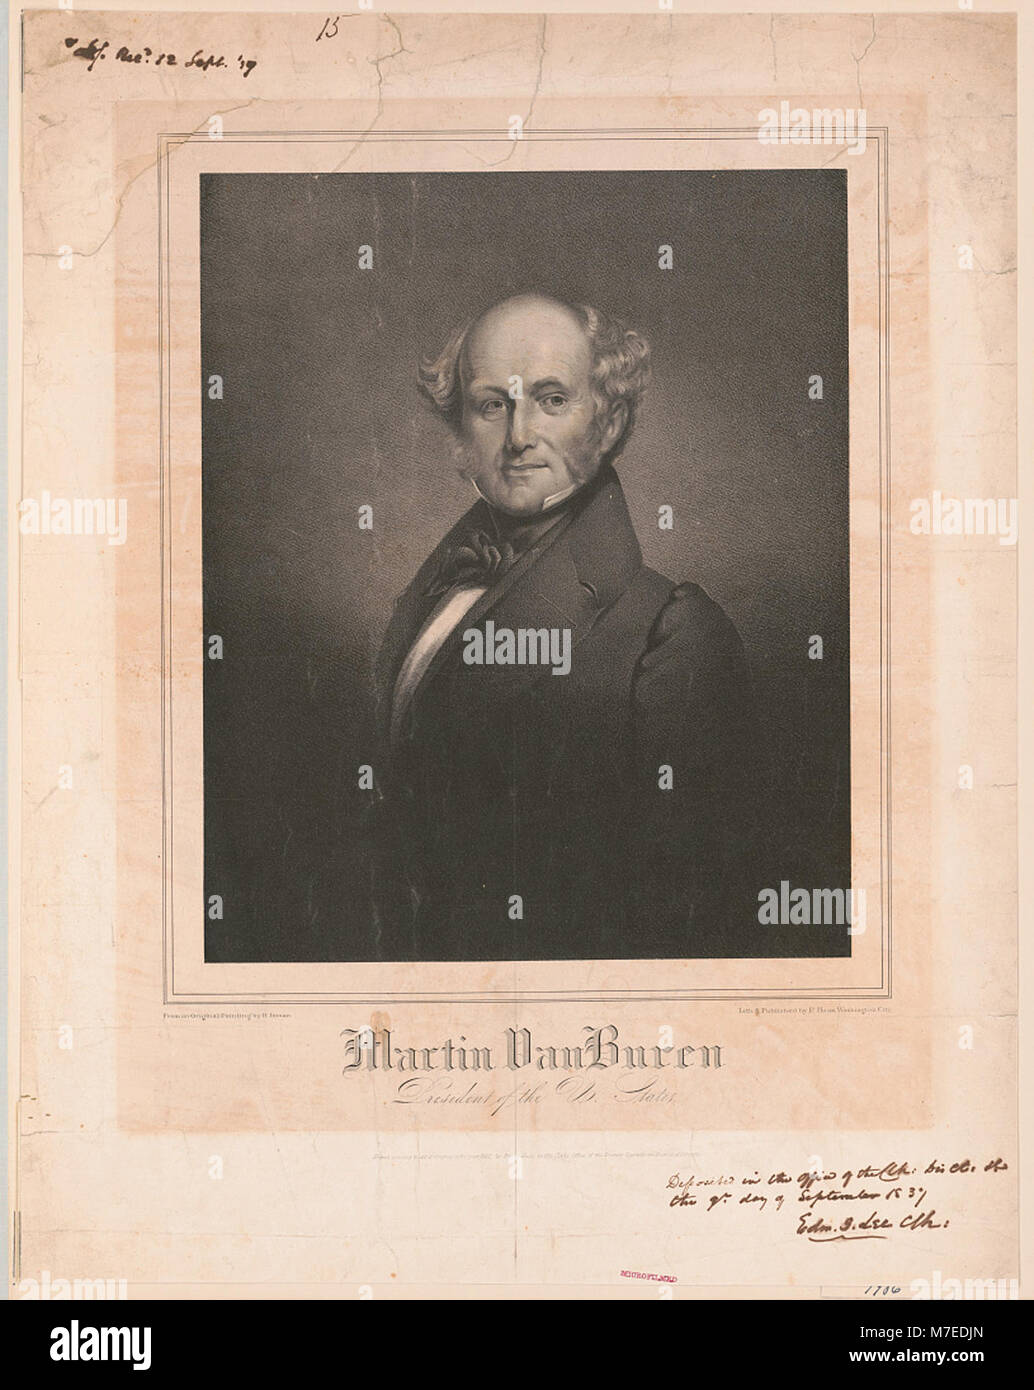 Martin Van Buren president of the U. States - from an original painting by H. Inman ; lith. & published by P. Haas, Washington City. LCCN2013645253 Stock Photo